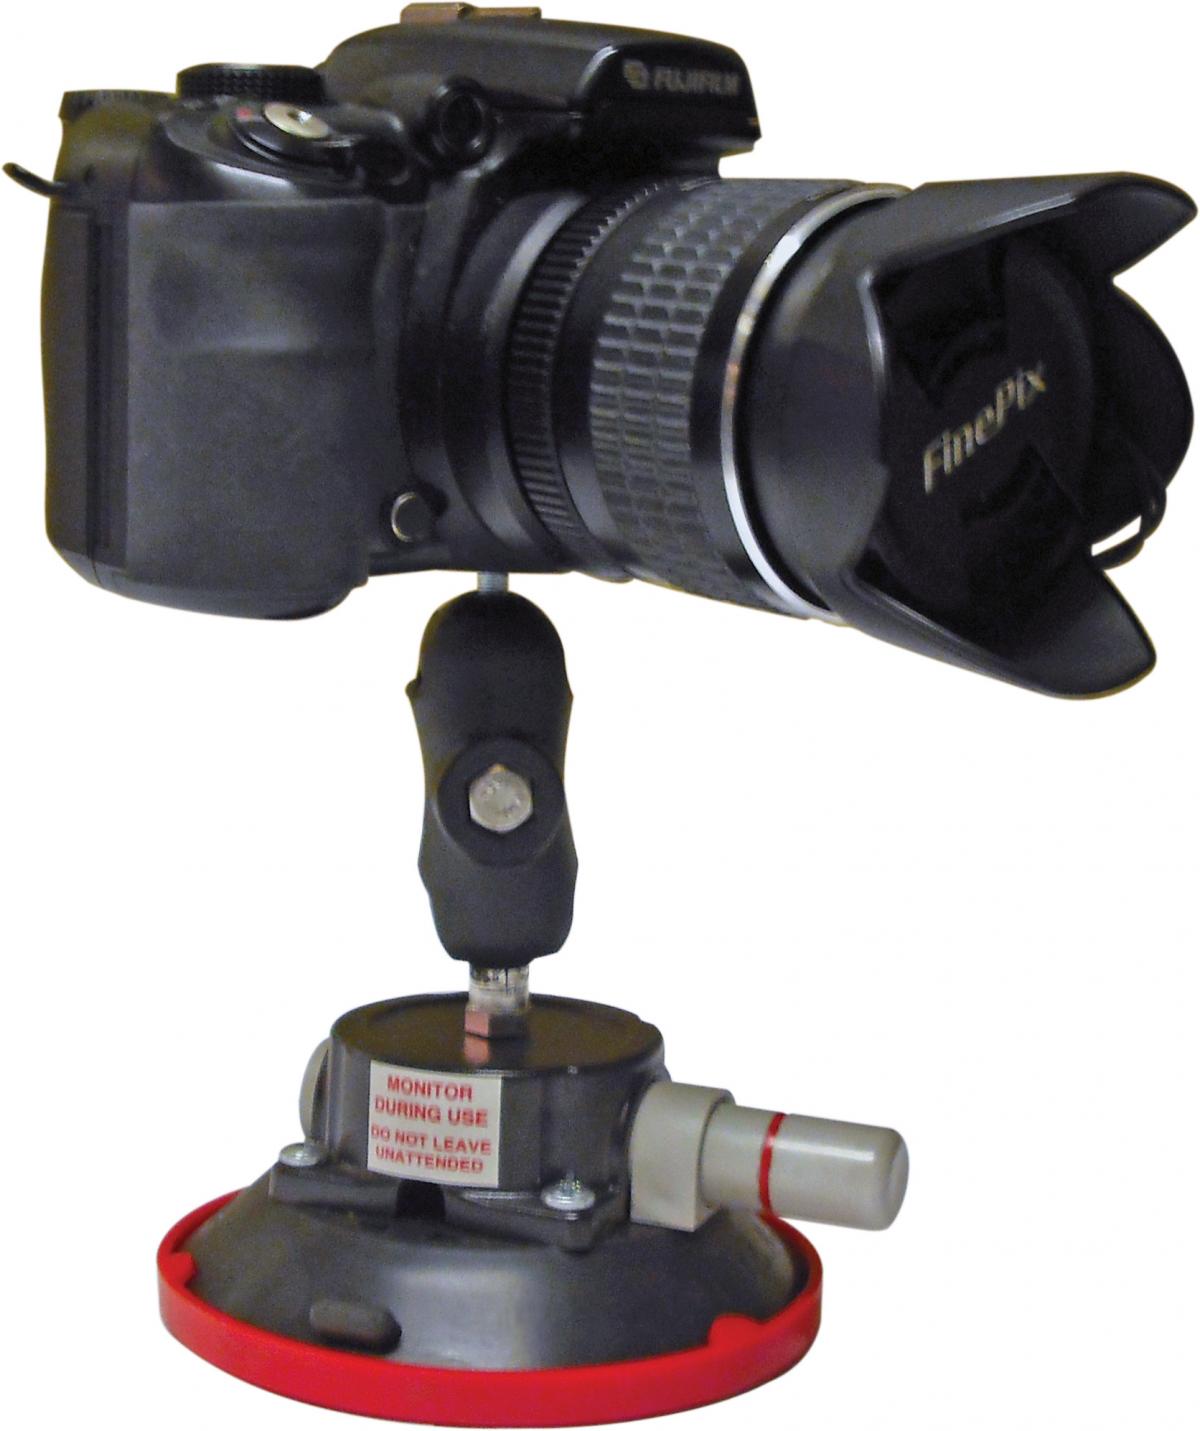 What are the benefits of suction mounts?